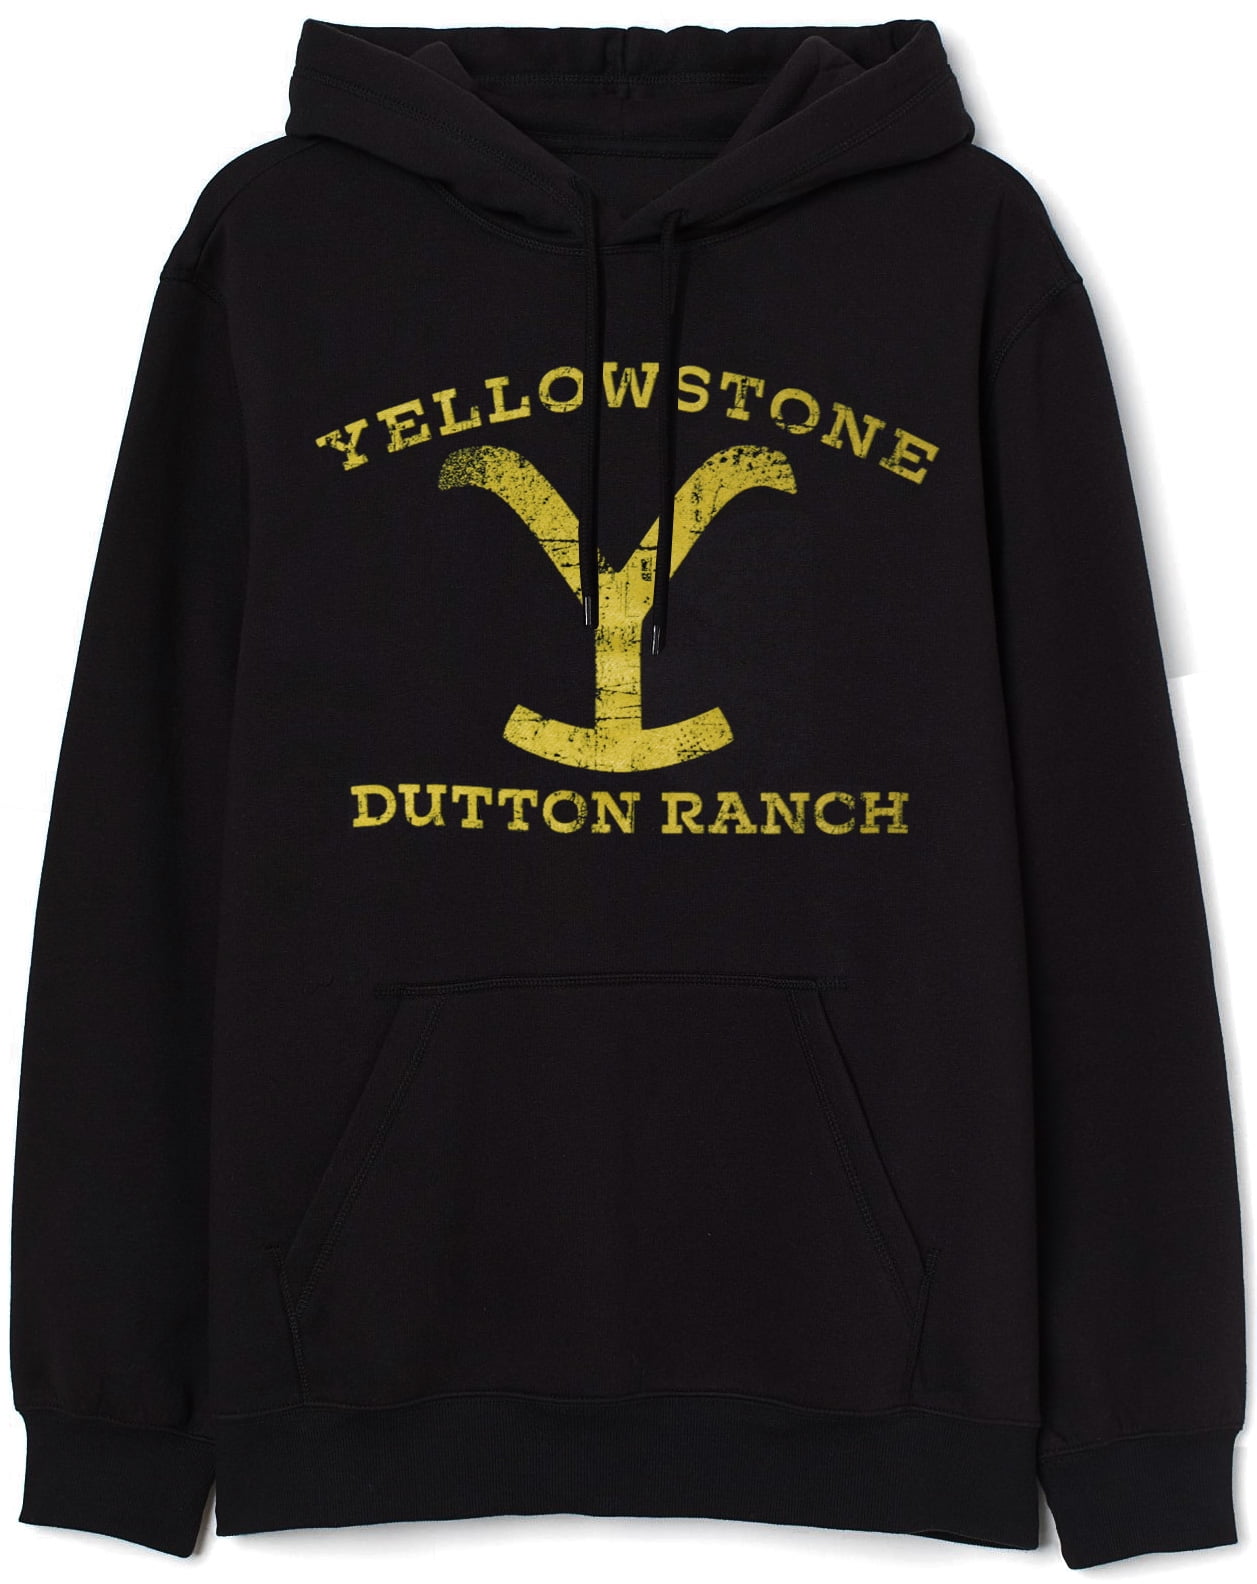 Pullover Hoodie Yellowstone Dutton Ranch